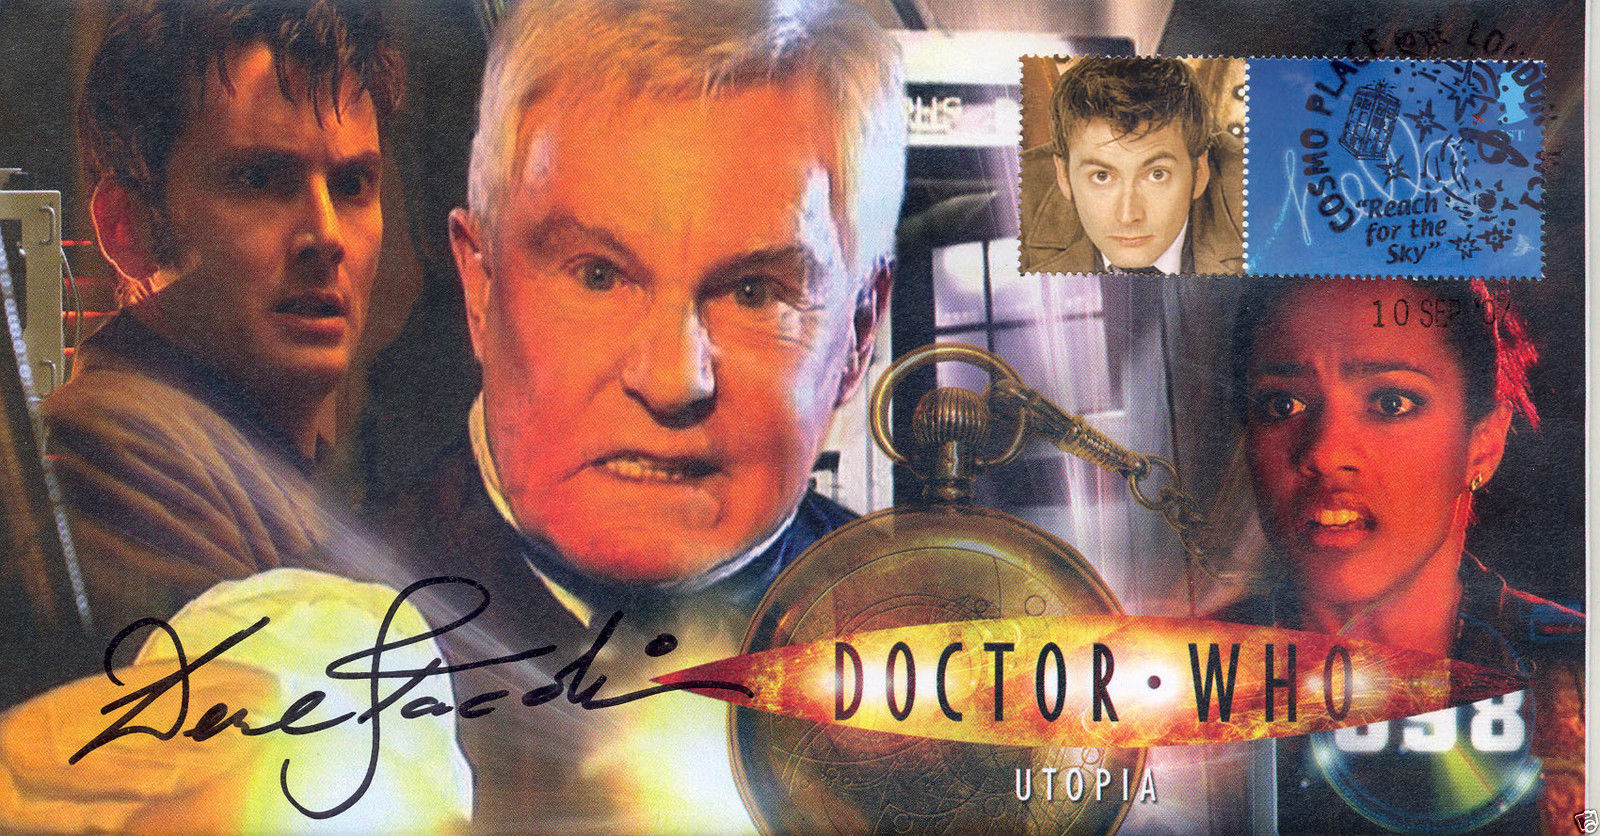 Doctor Who 2007 Series 3 Episode 11 Utopia Collectible Stamp Cover Signed by SIR DEREK JACOBI